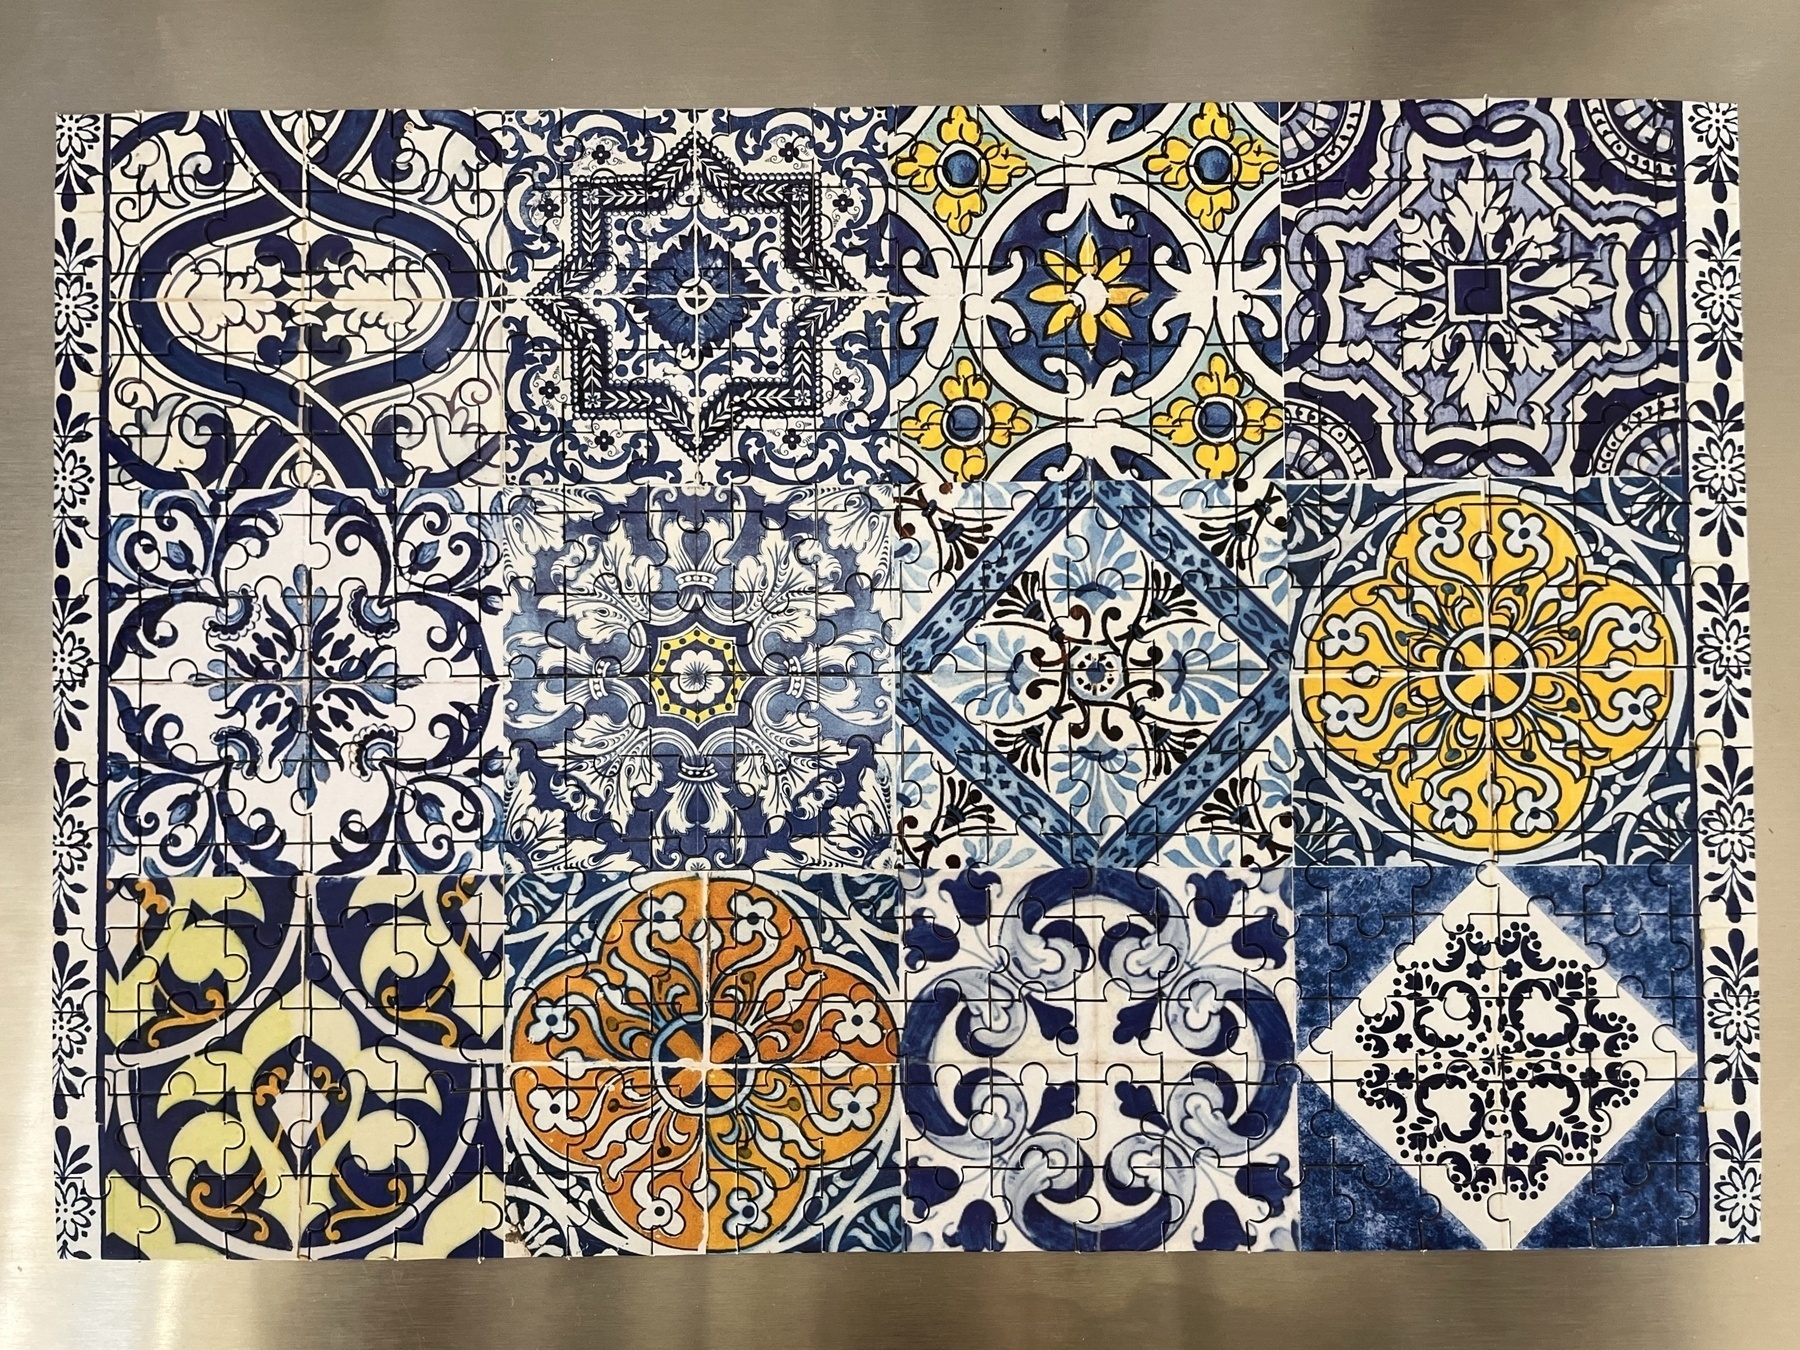 A completed 280 piece jigsaw puzzle of Portuguese tiles